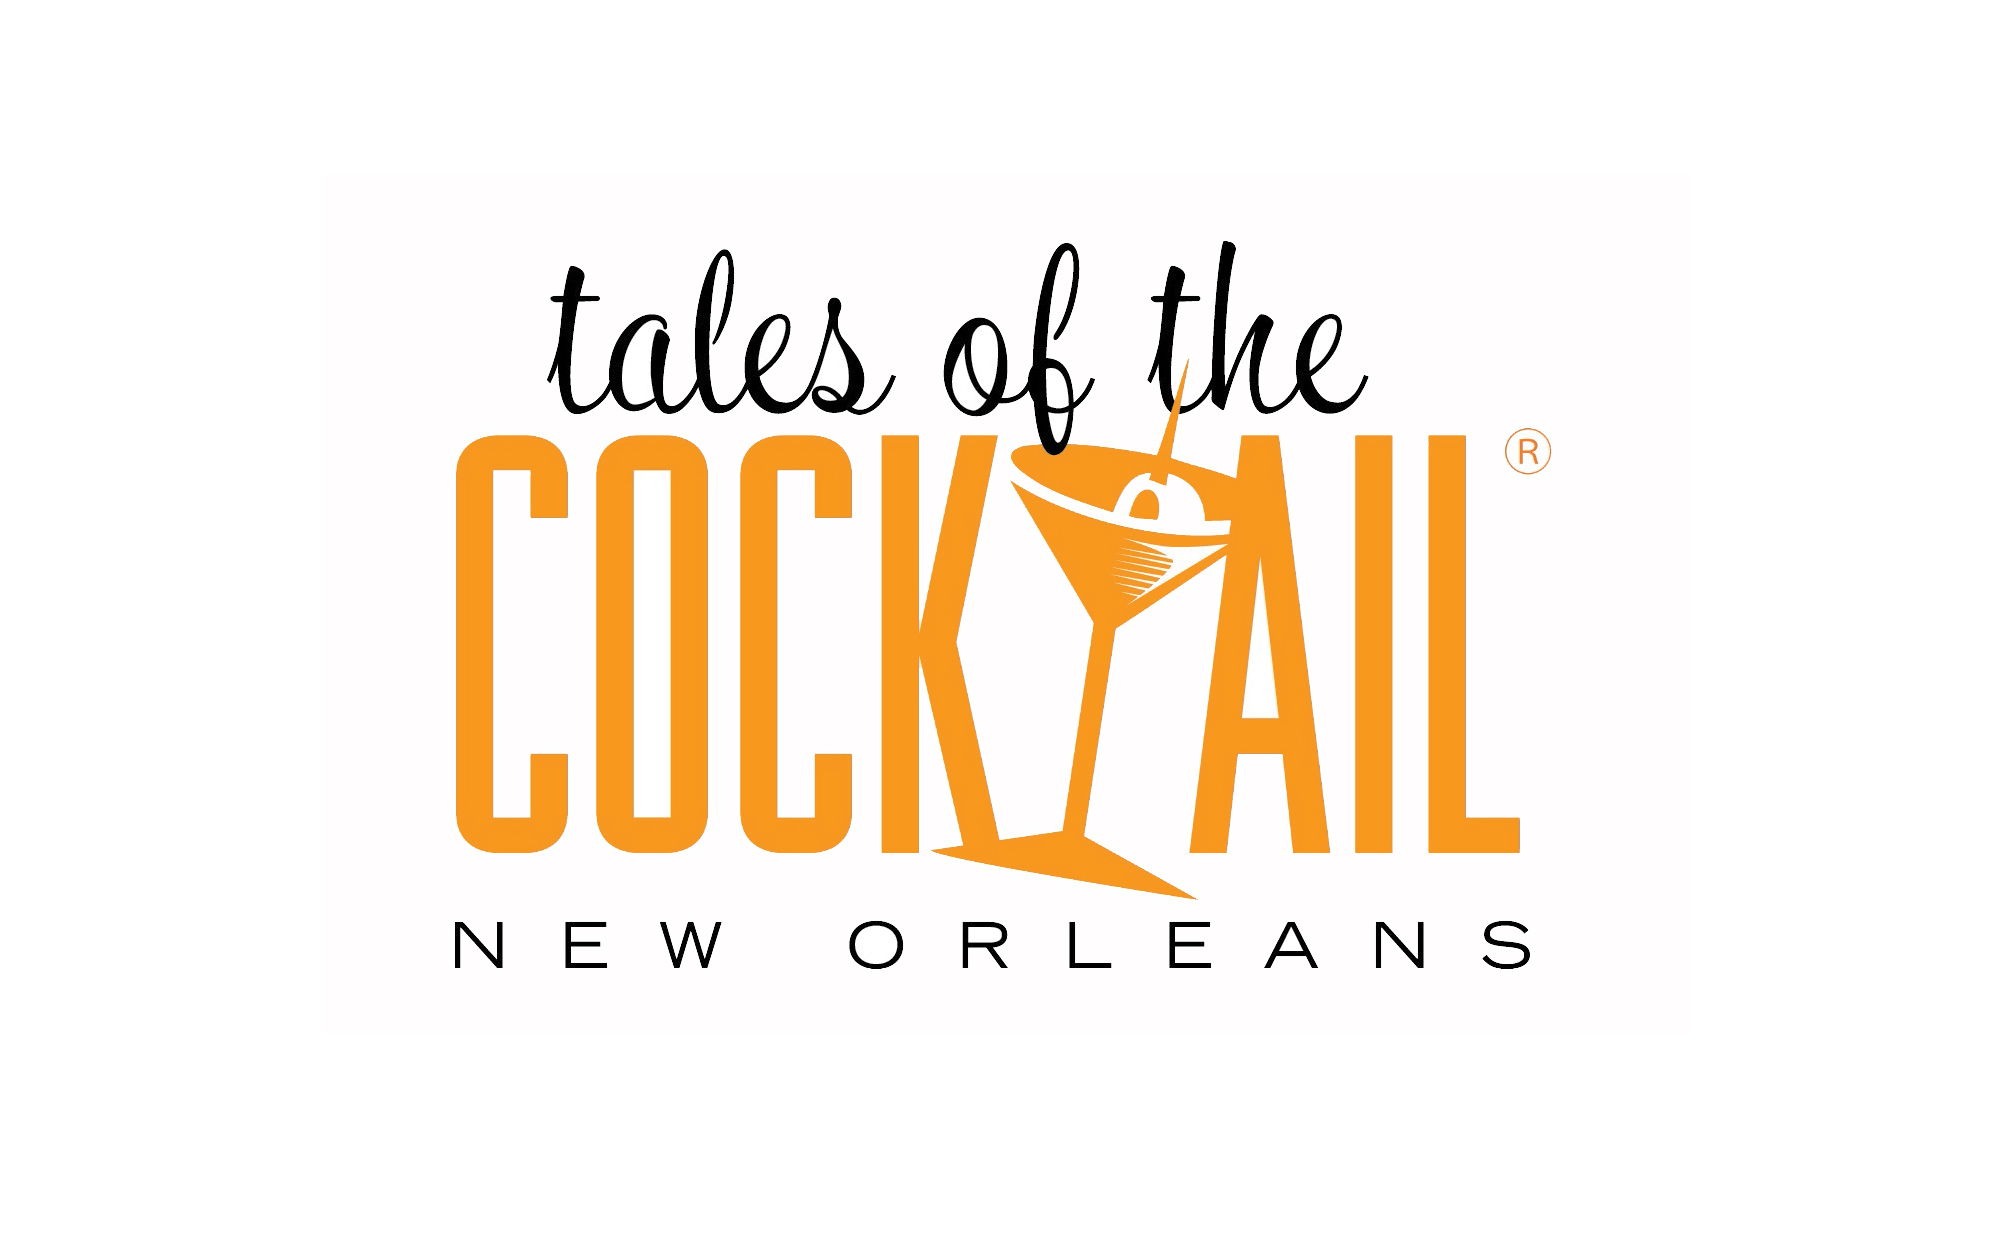 TALES OF THE COCKTAIL